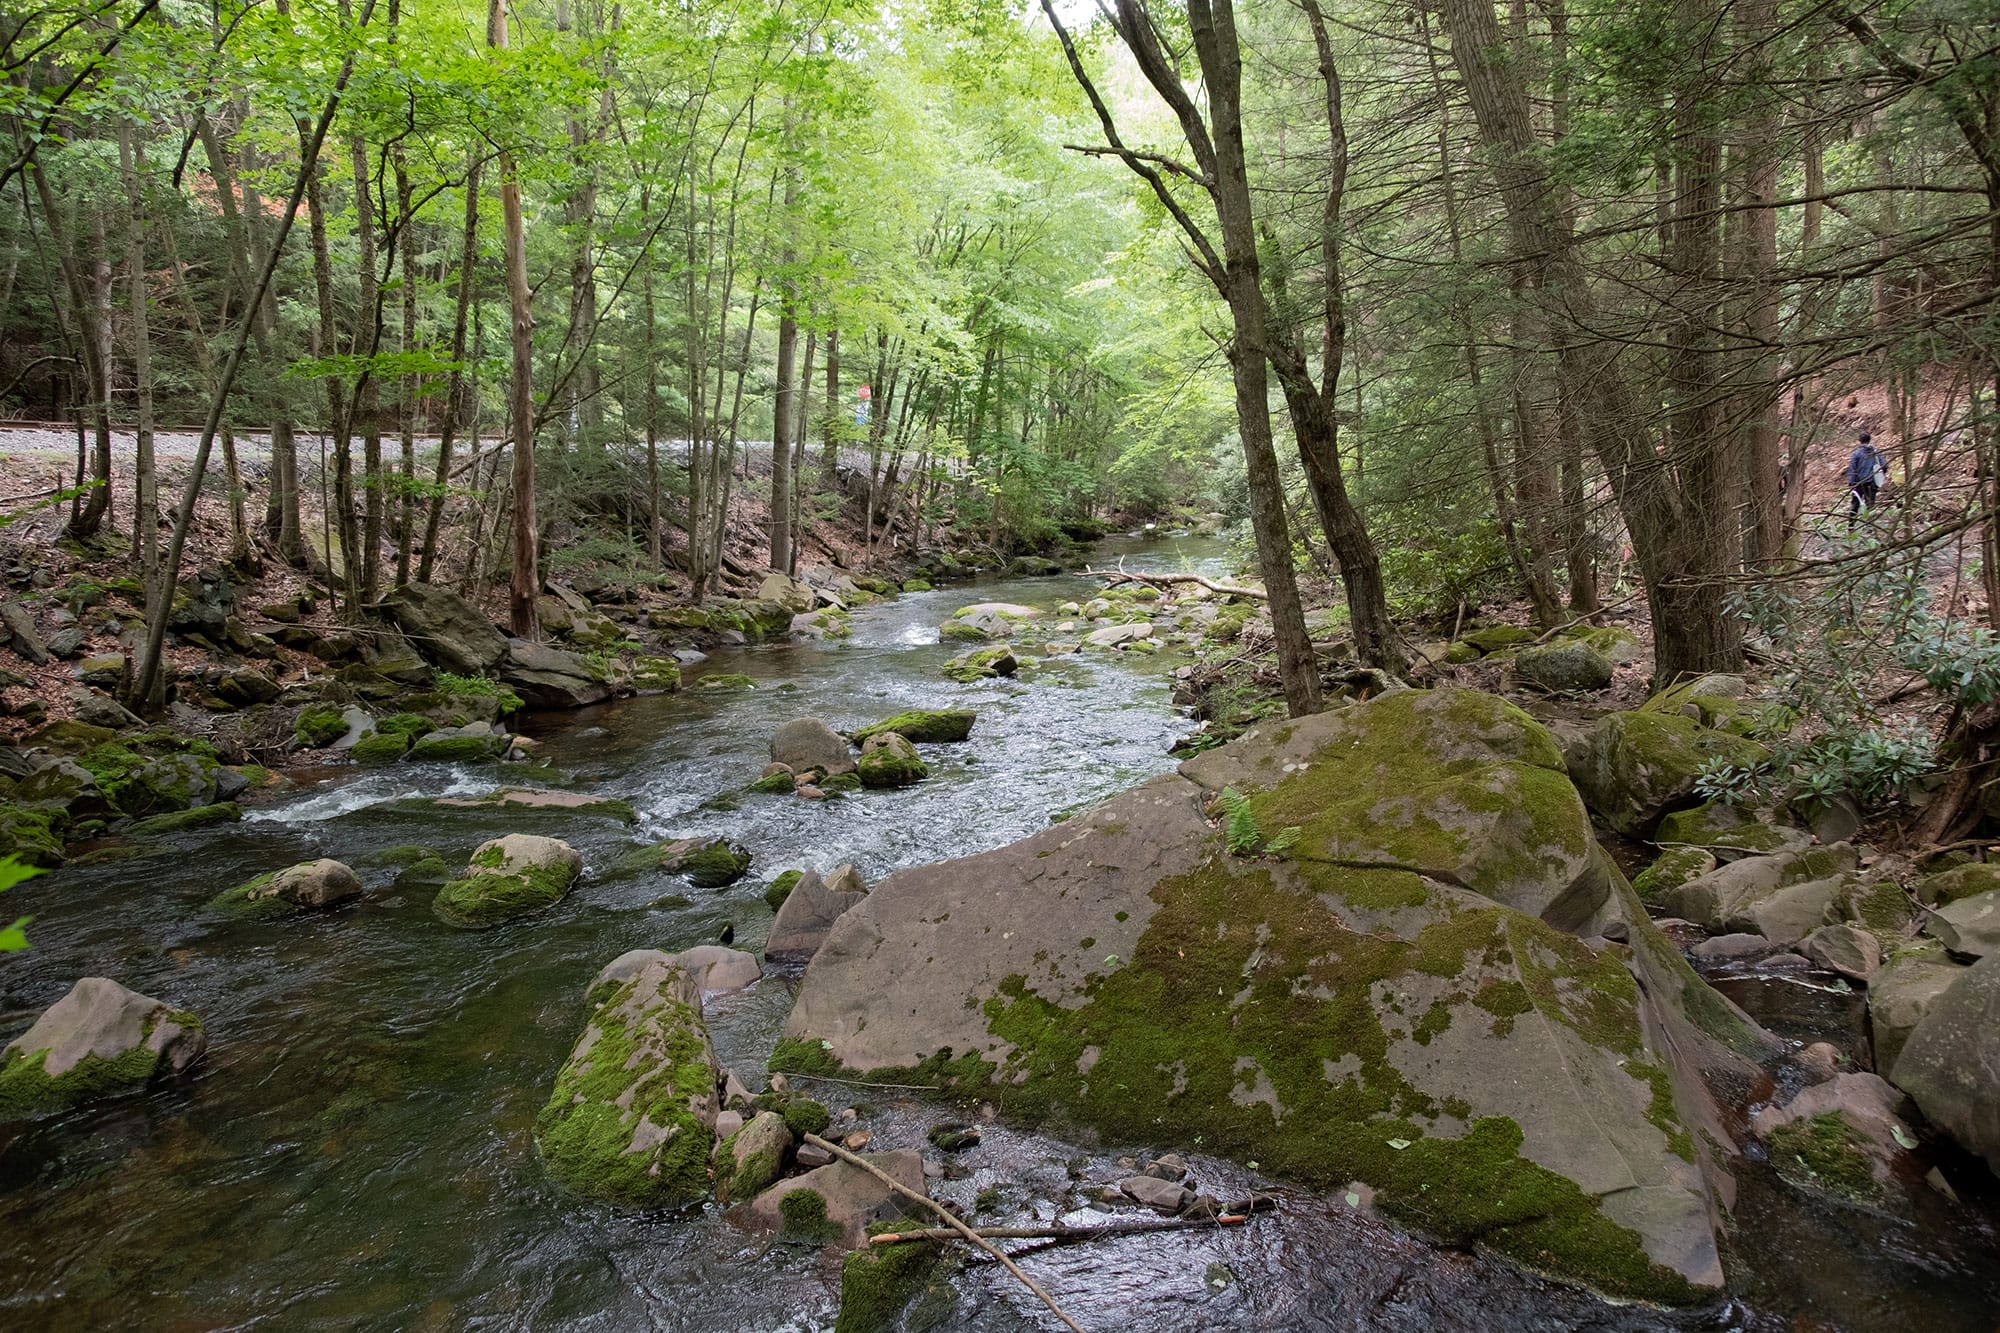 A stream running through a wooded area.